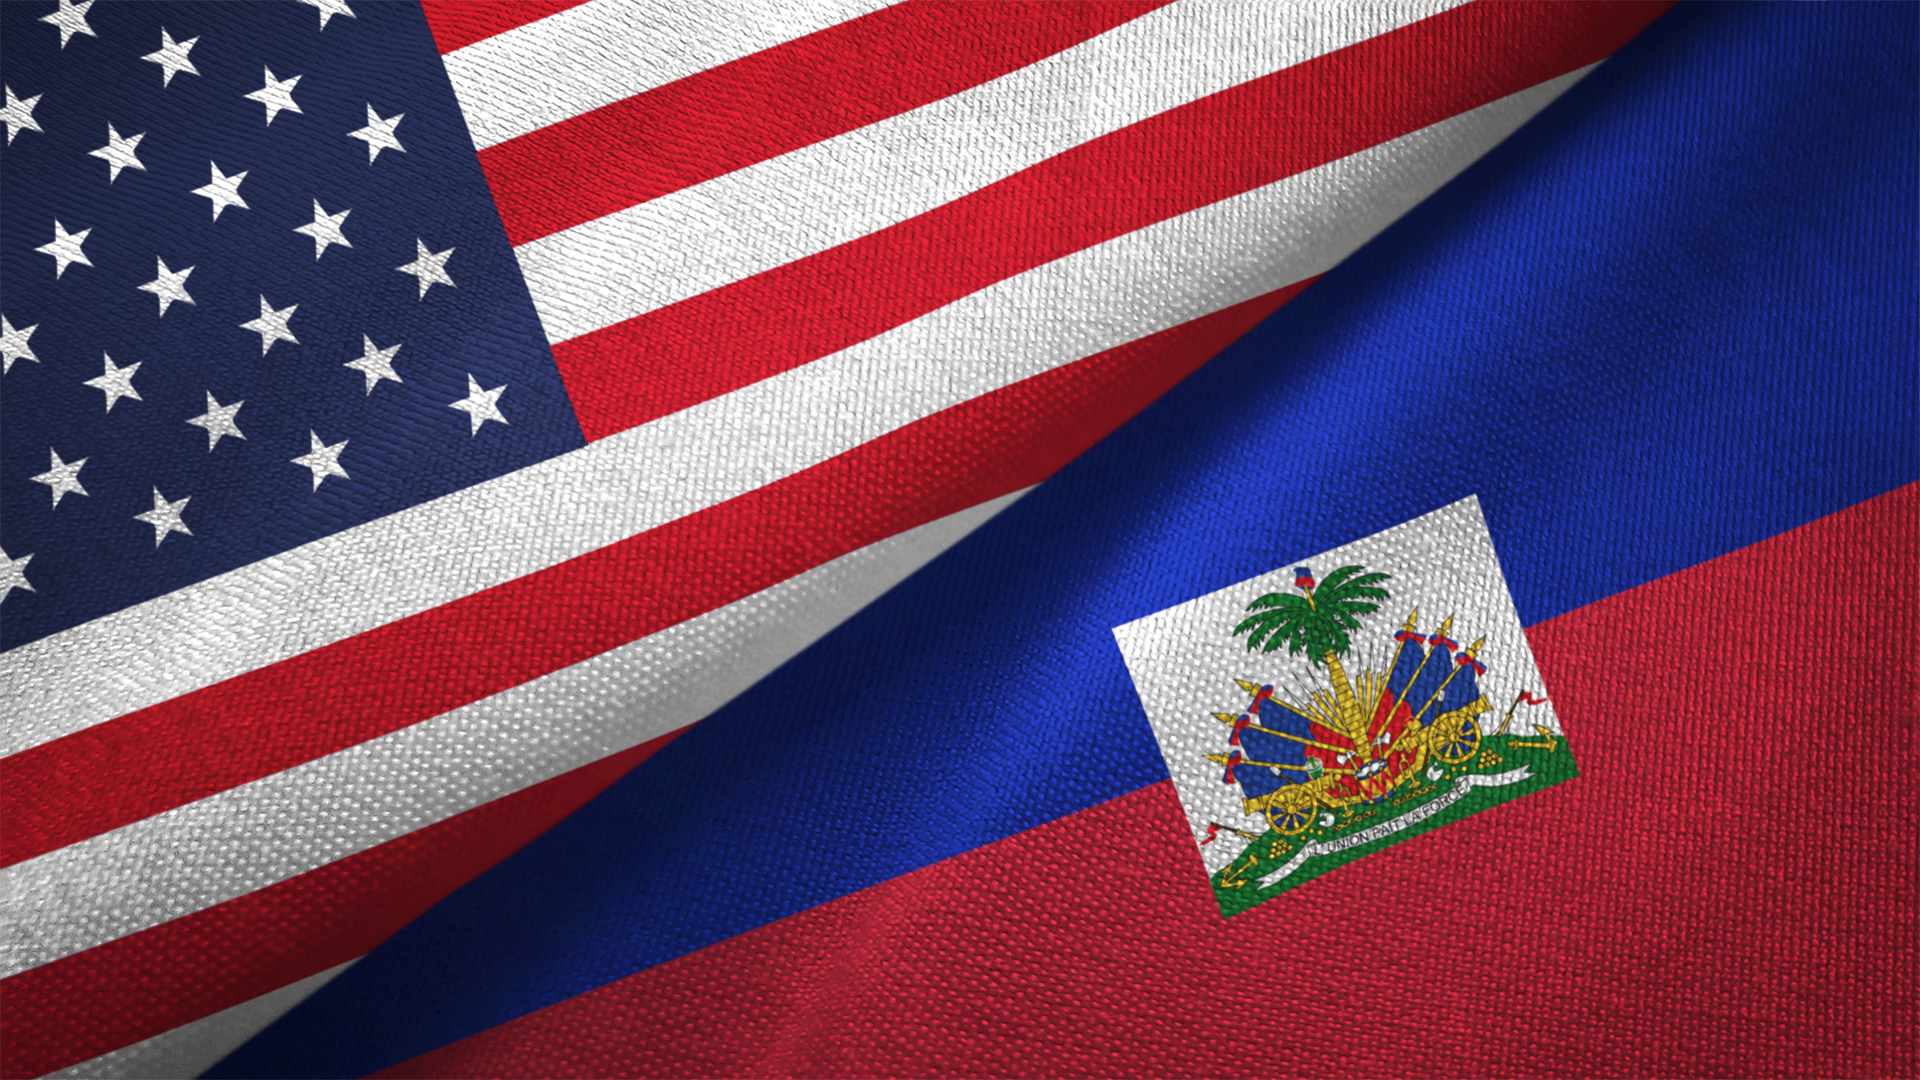 United States and Haiti two flags textile cloth, fabric texture Image